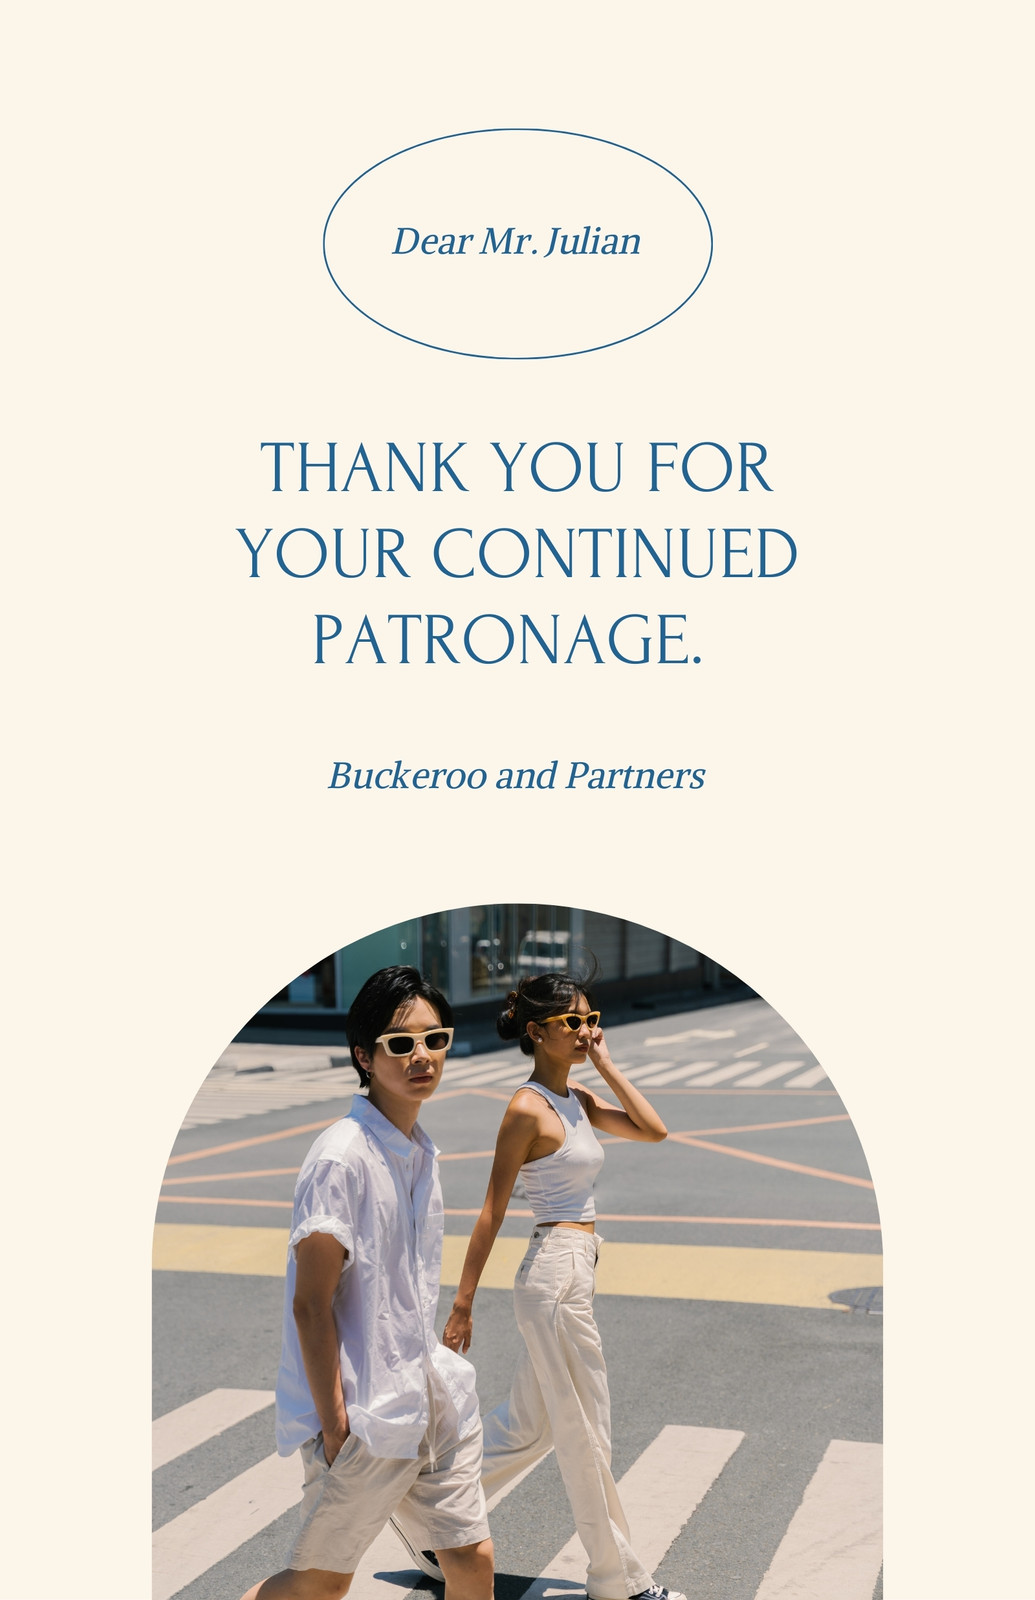 Xxx Bfhd 8 - Page 3 - Free printable business Thank You postcard templates | Canva